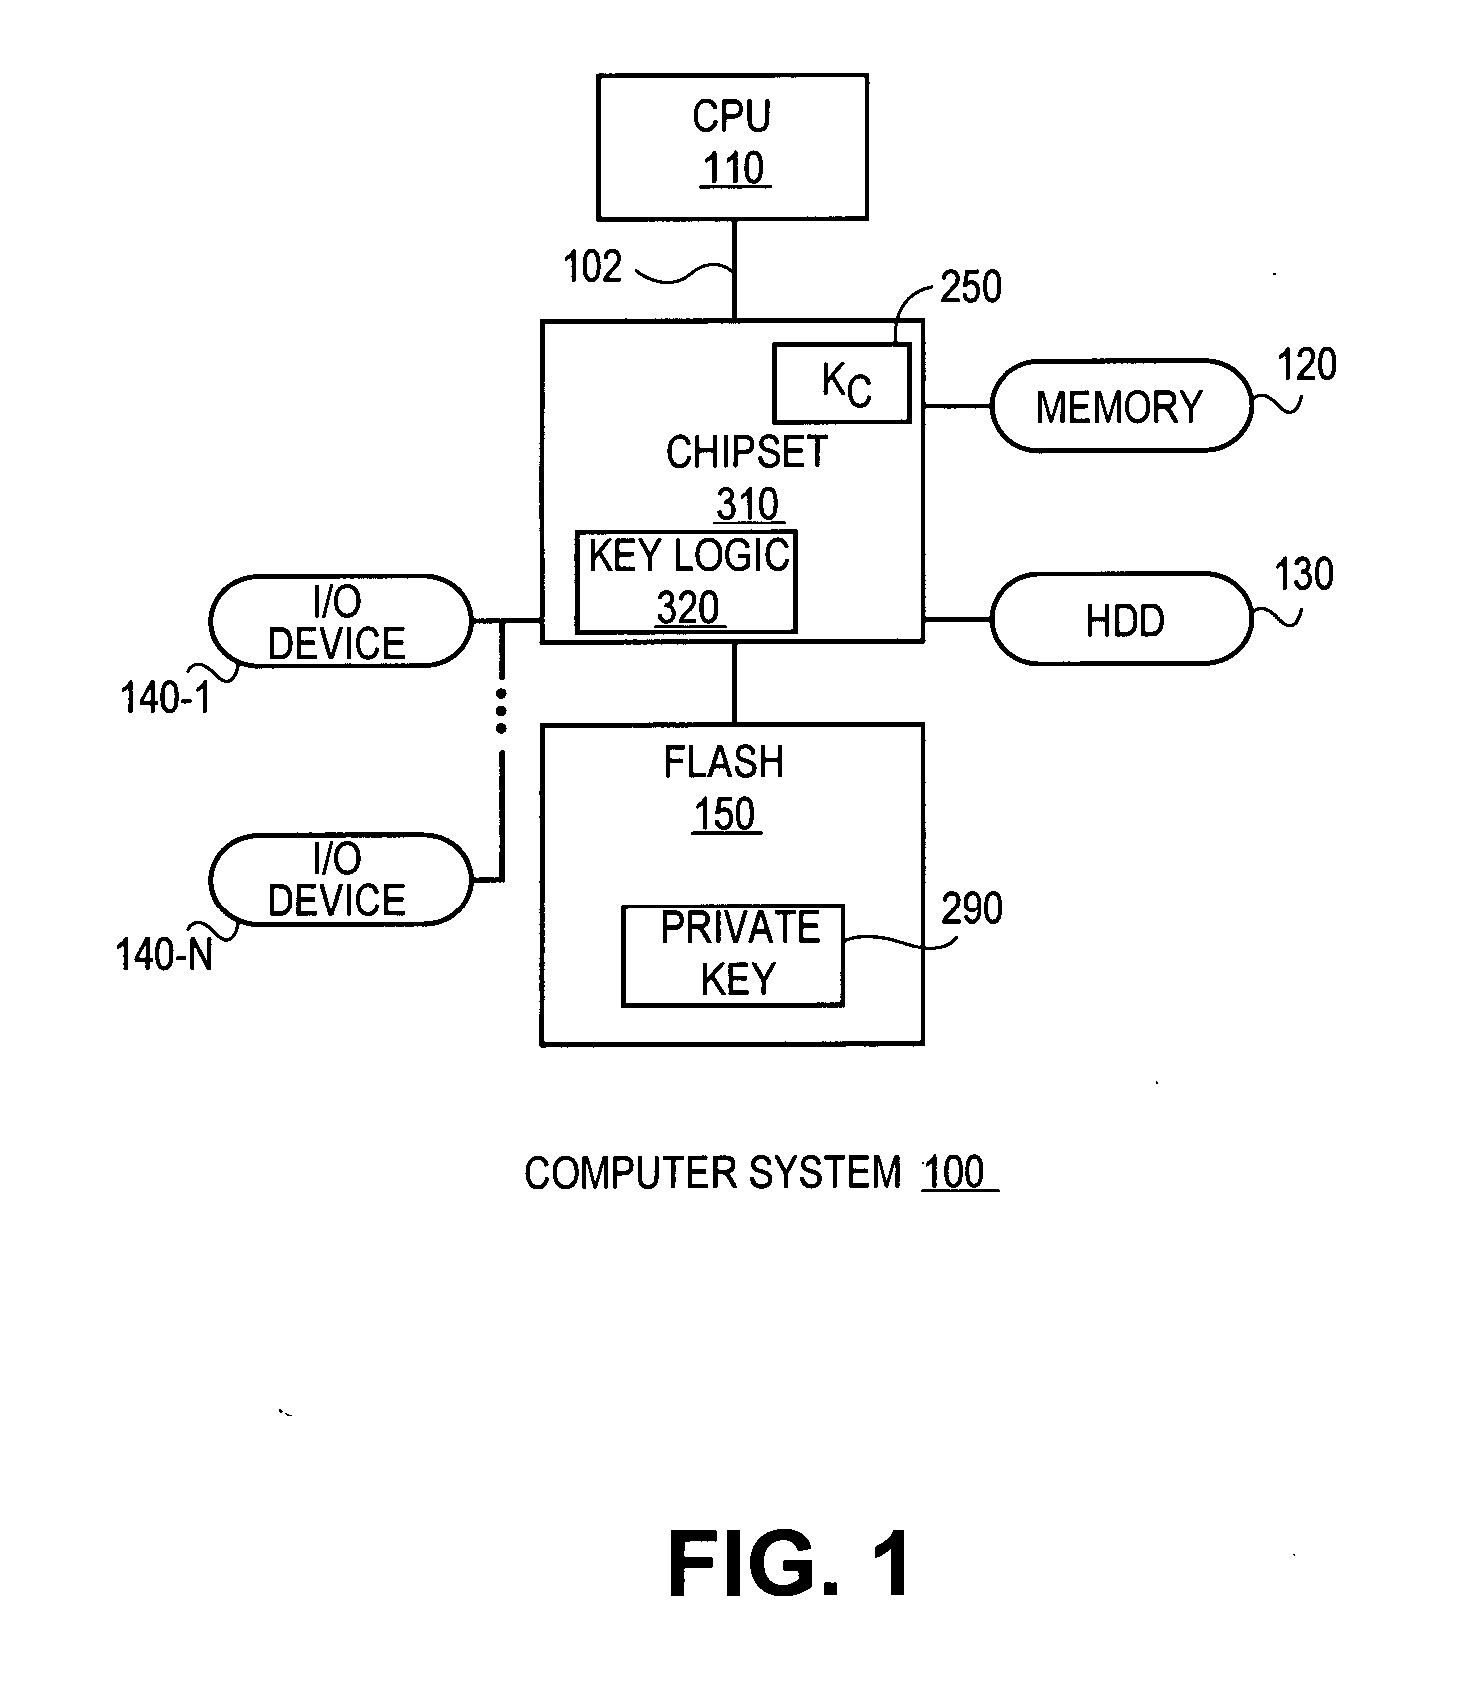 Apparatus and method for distributing private keys to an entity with minimal secret, unique information